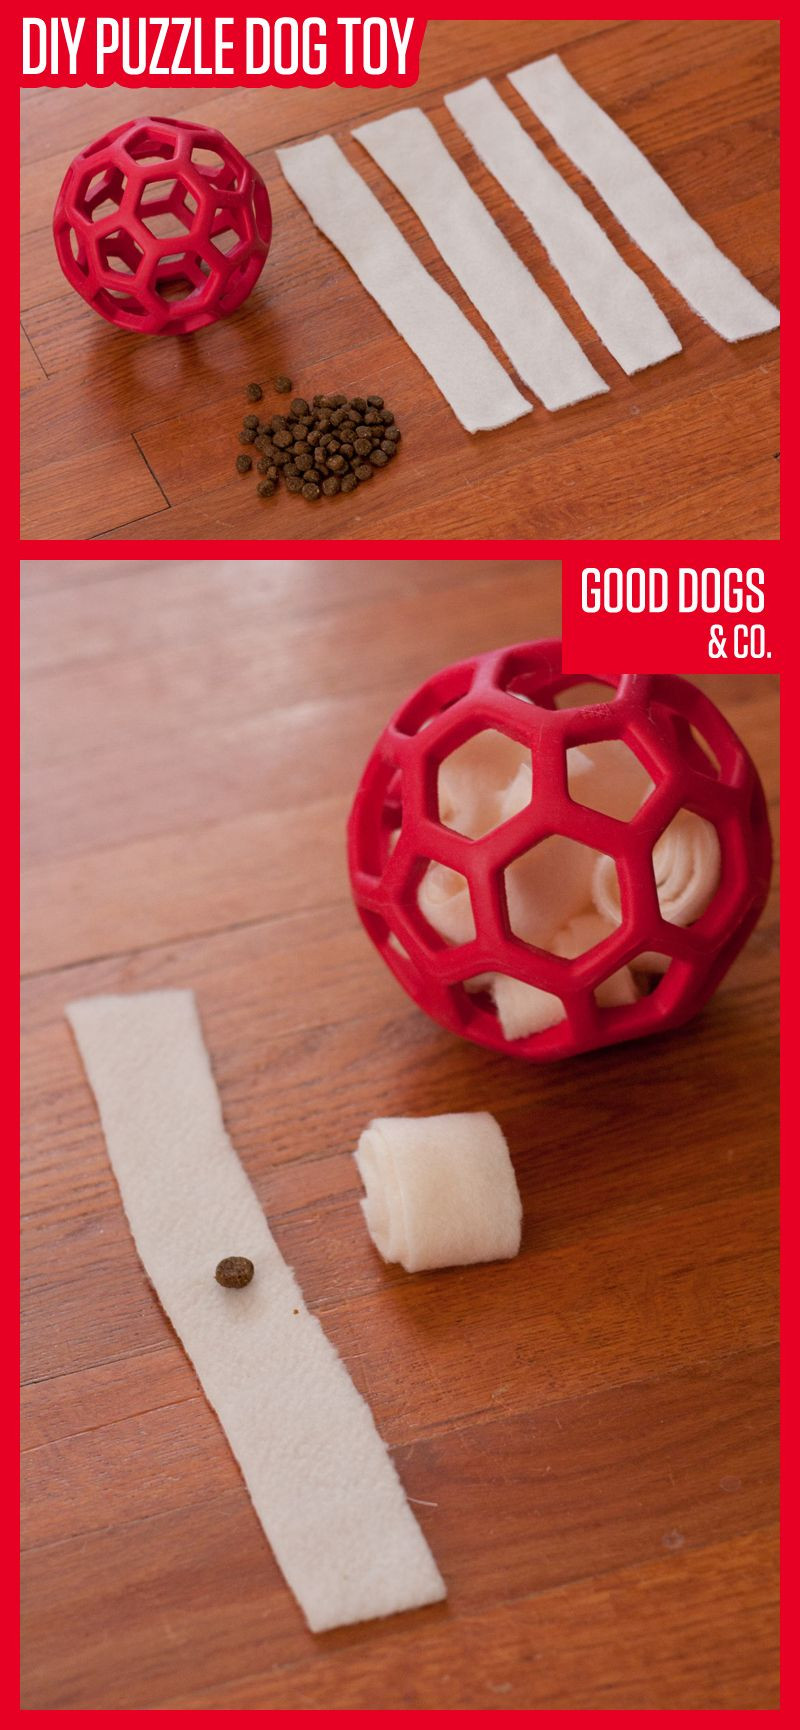 DIY Dog Puzzle Toys
 How To DIY A Puzzle Dog Toy With Two Simple Materials